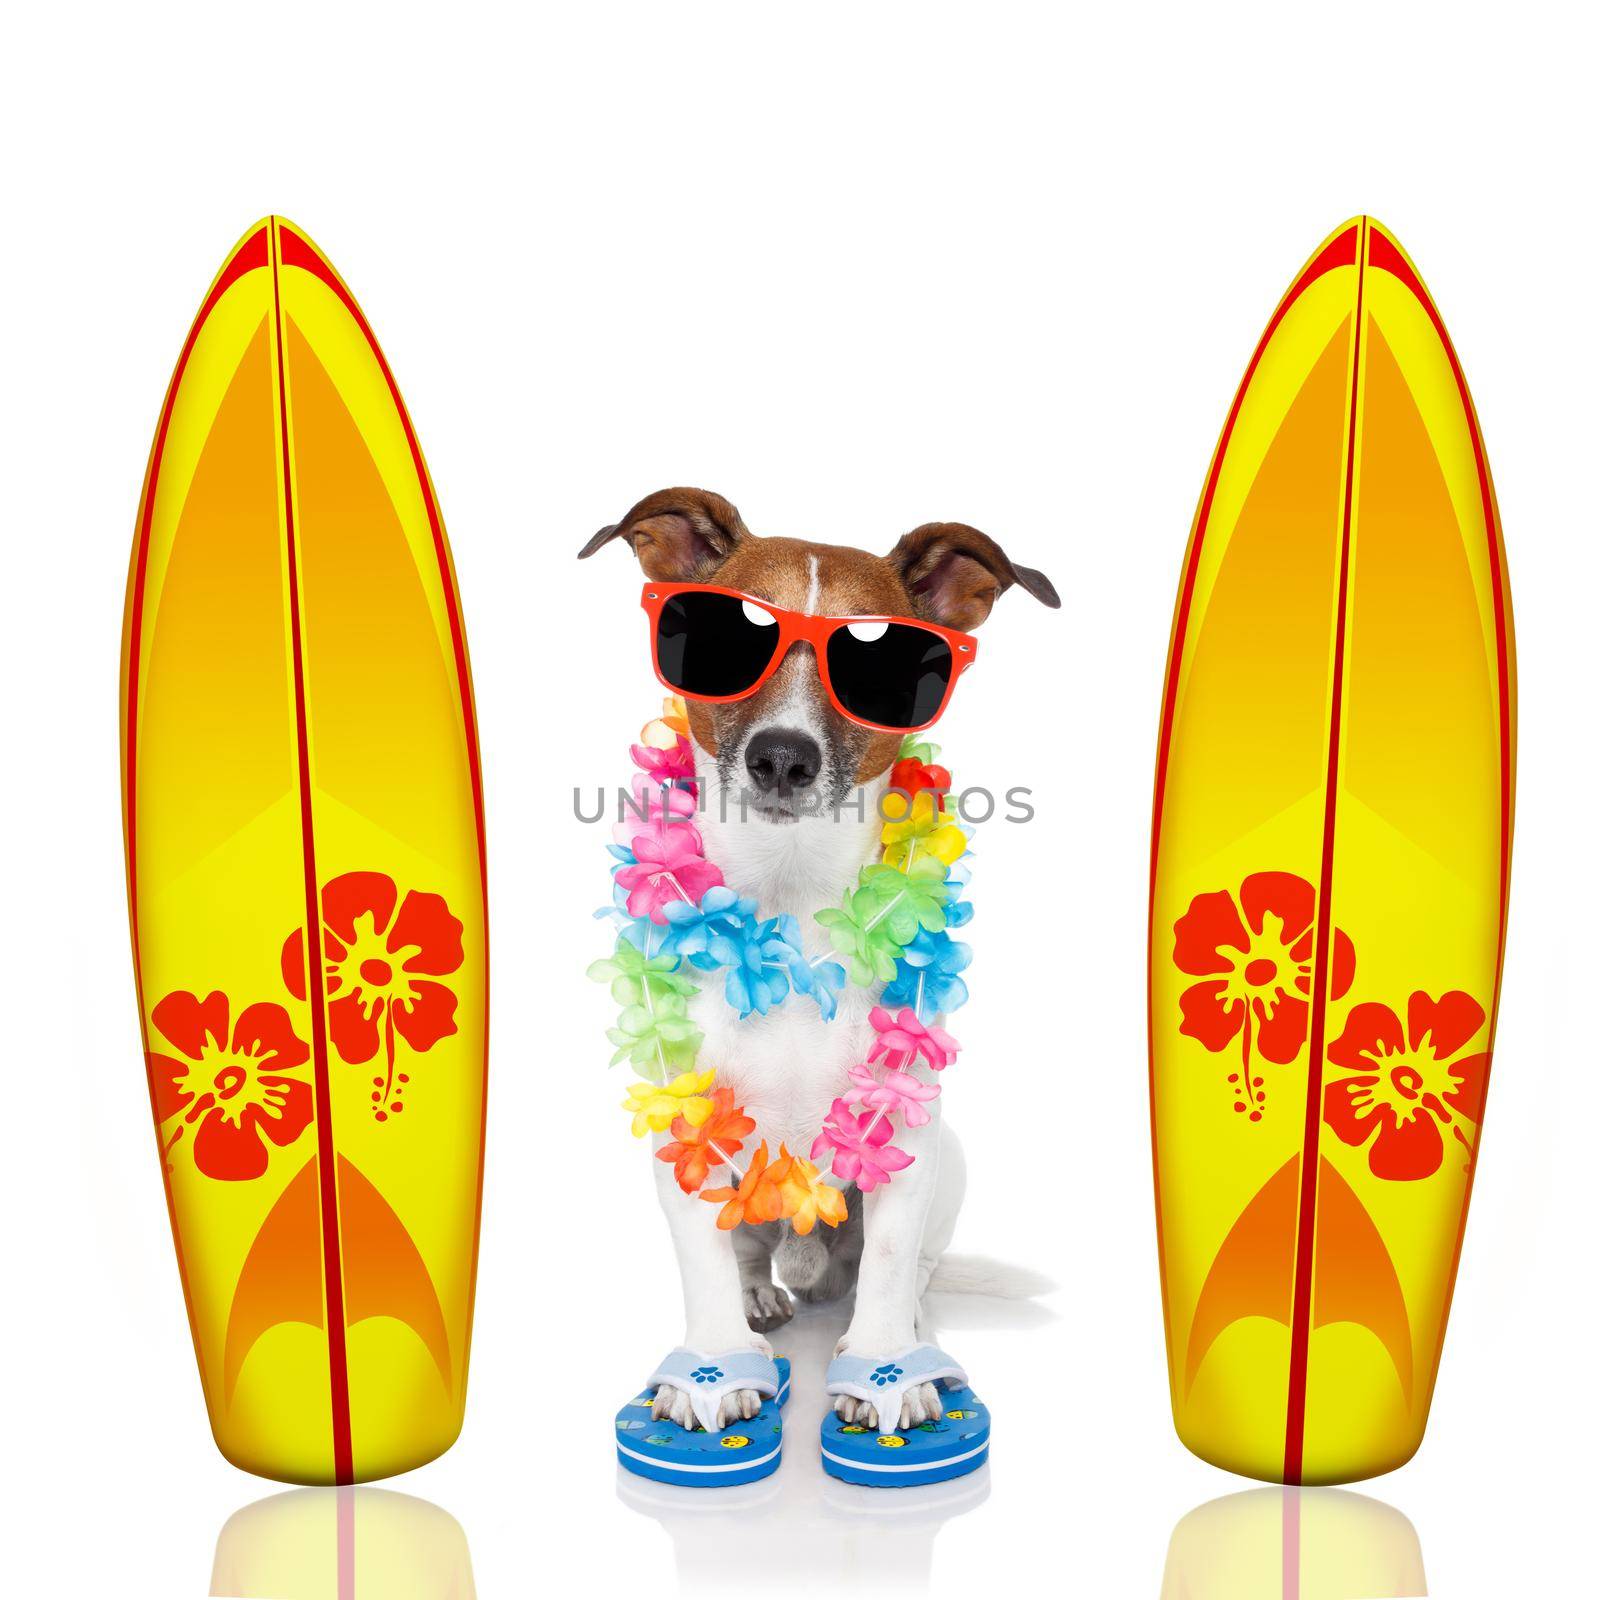 summer paradise vacation surfer jack russell dog with surfboard and sunglasses isolated on white background